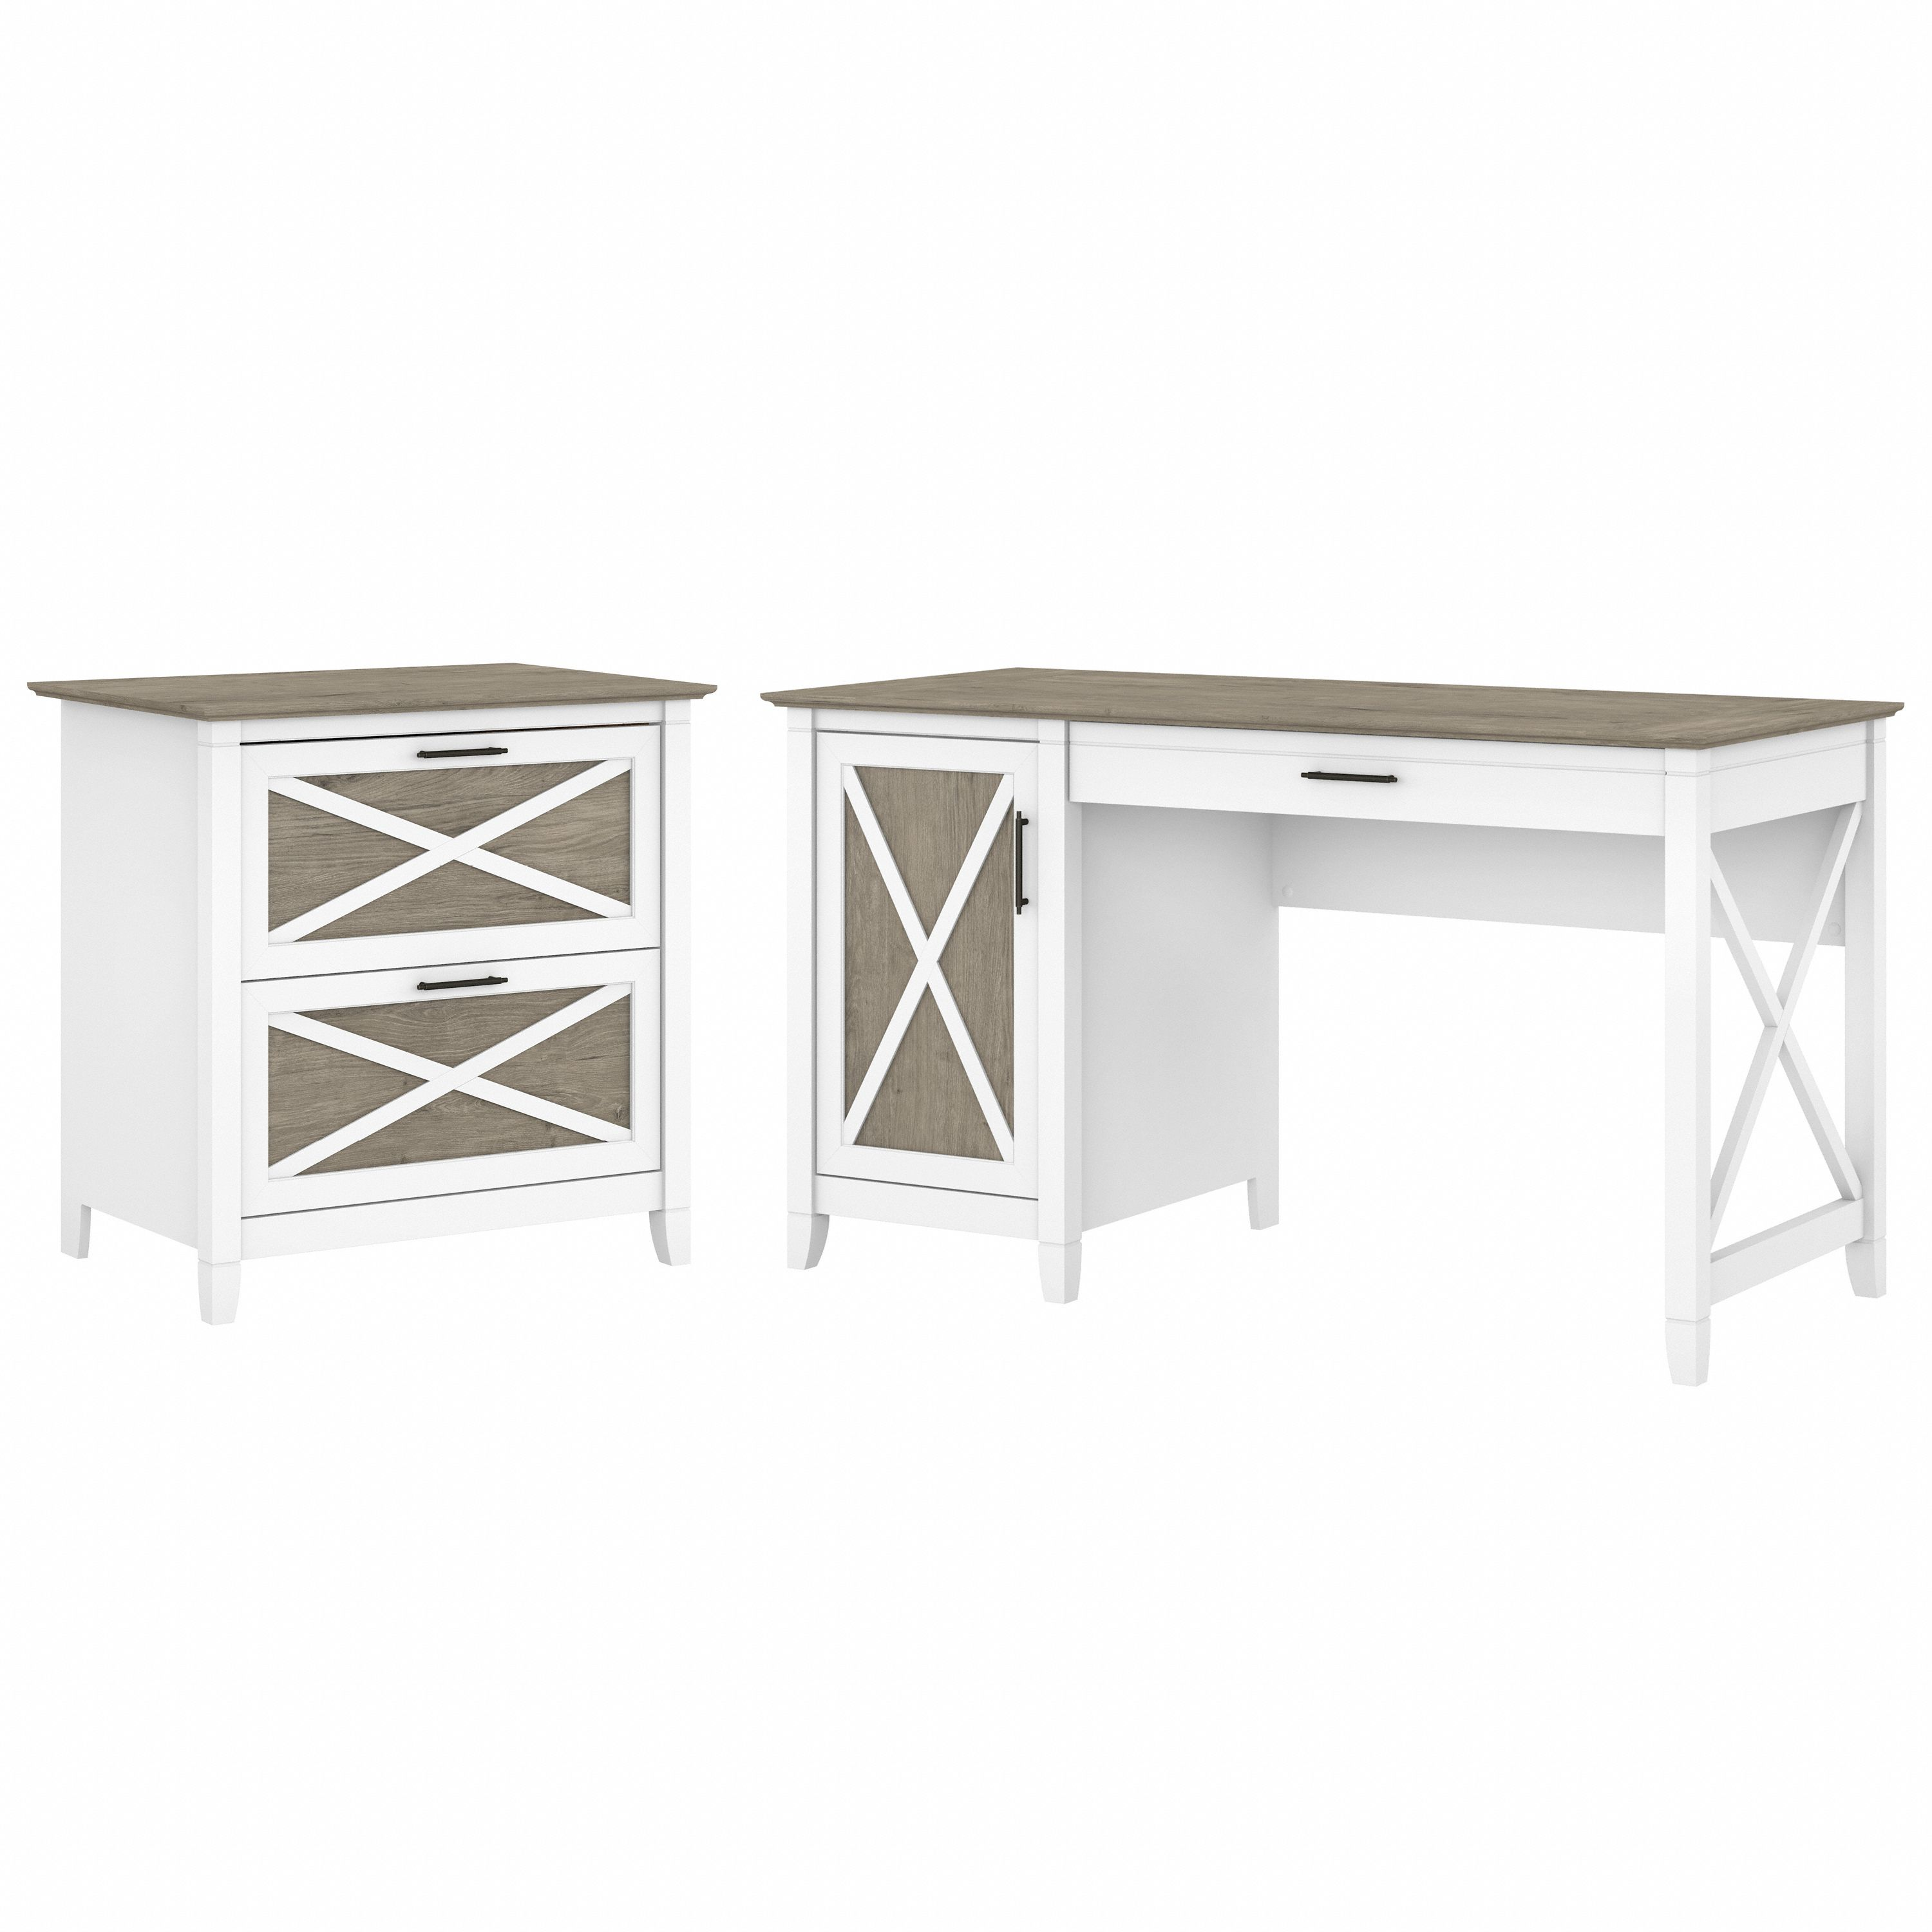 Shop Bush Furniture Key West 54W Computer Desk with Storage and 2 Drawer Lateral File Cabinet 02 KWS008G2W #color_shiplap gray/pure white